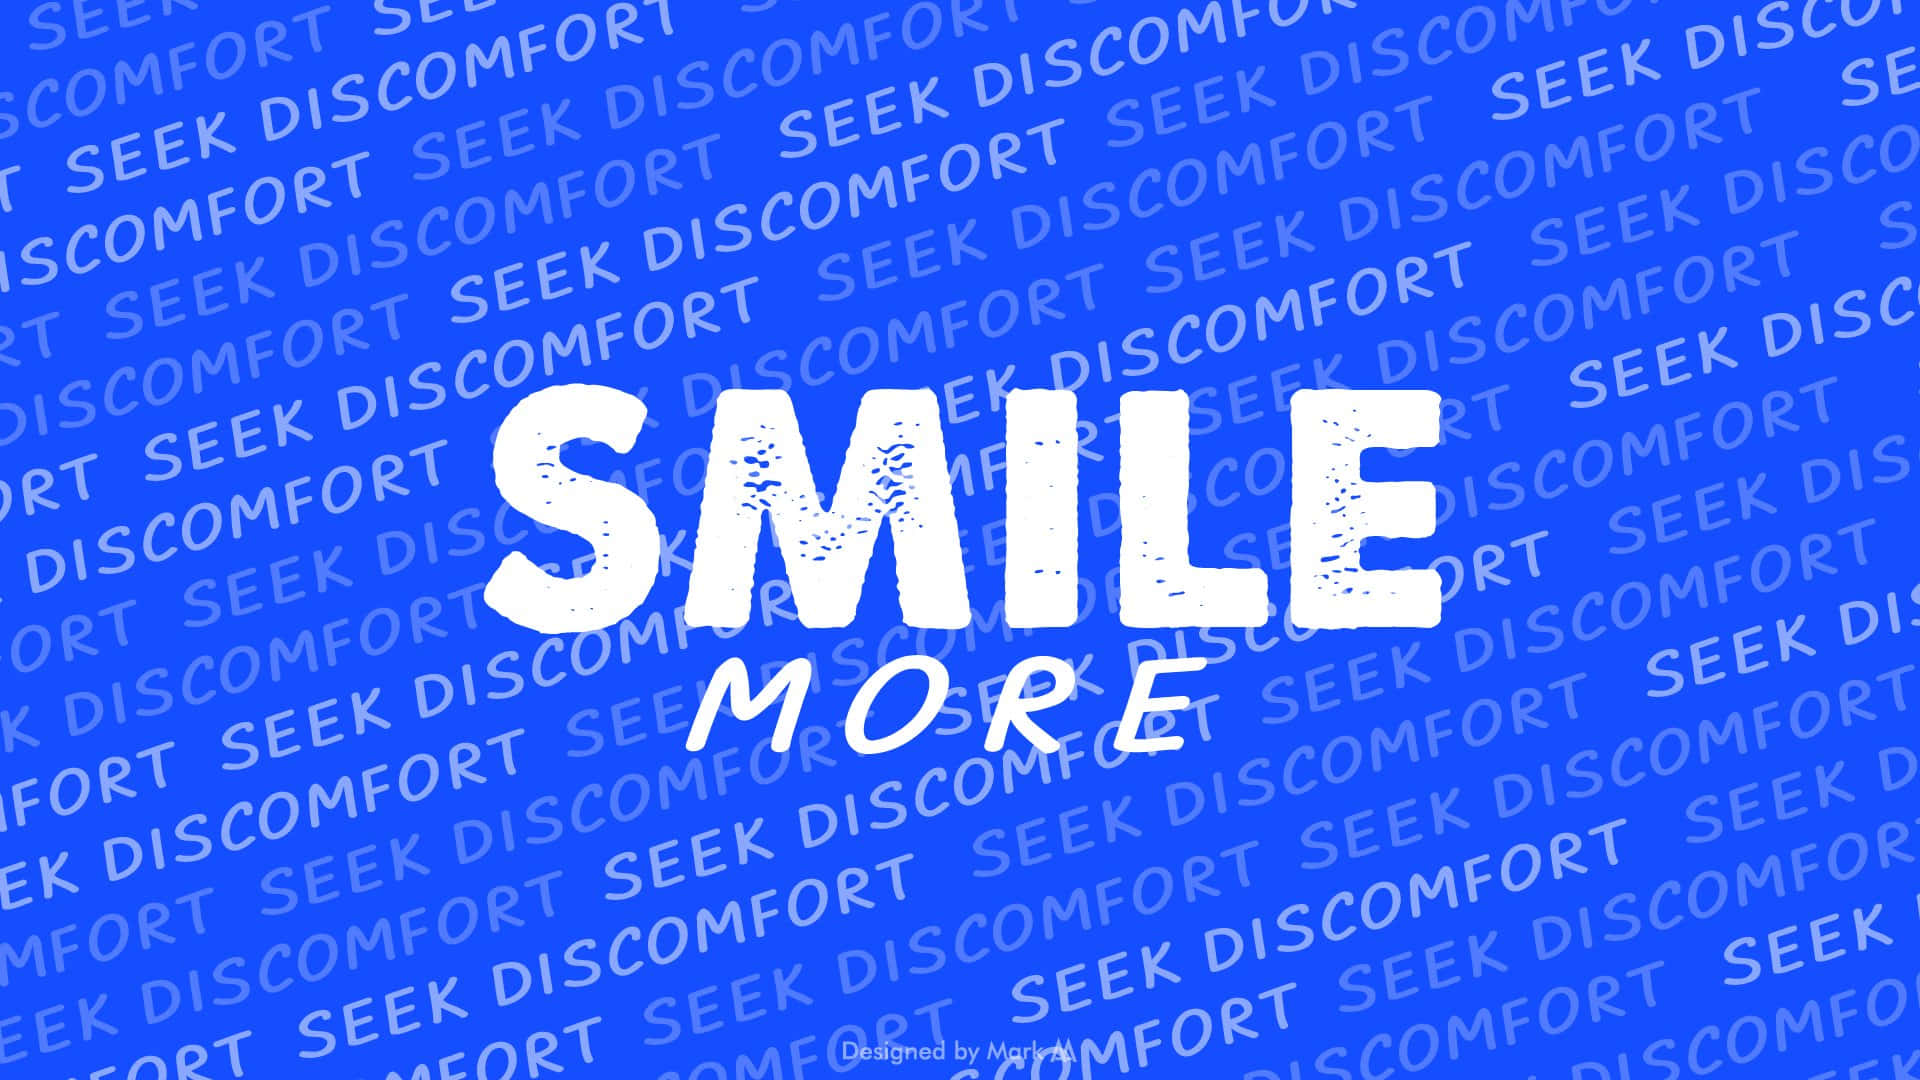 Step out of your comfort zone with Seek Discomfort Wallpaper